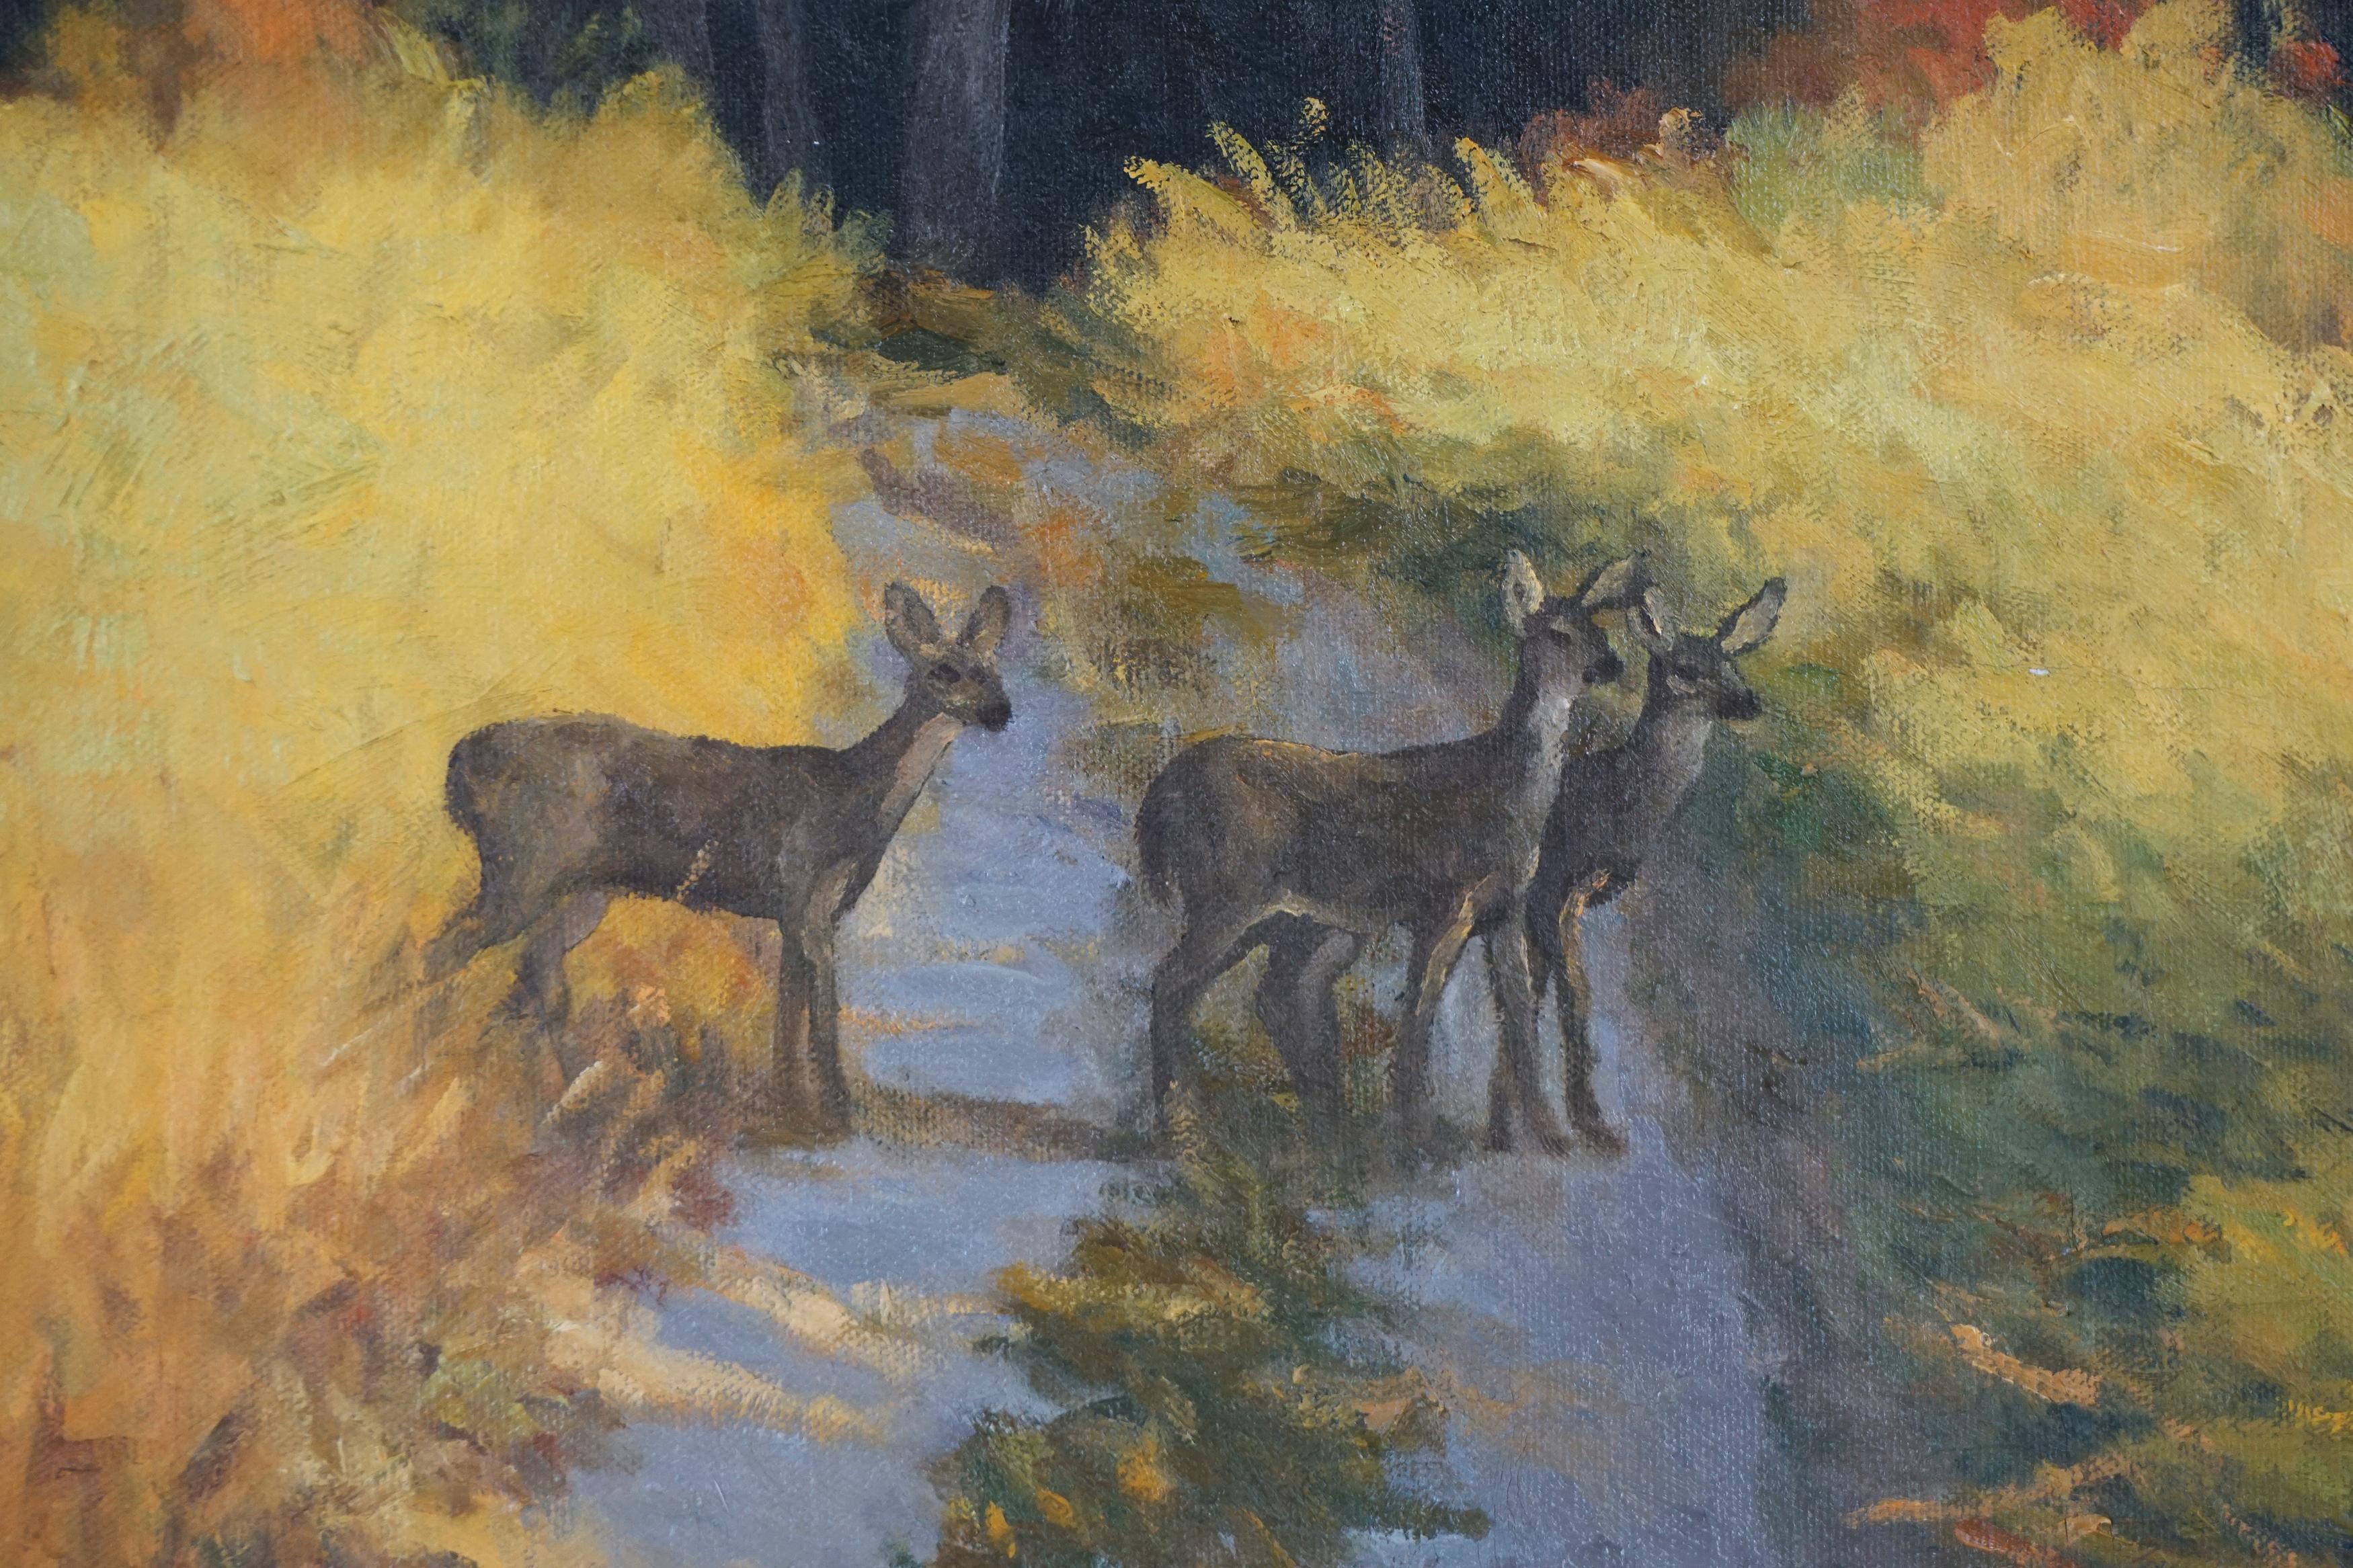 Carmel Valley, California Autumnal Landscape with Deer in Meadow - American Impressionist Painting by Wayne Weberbauer